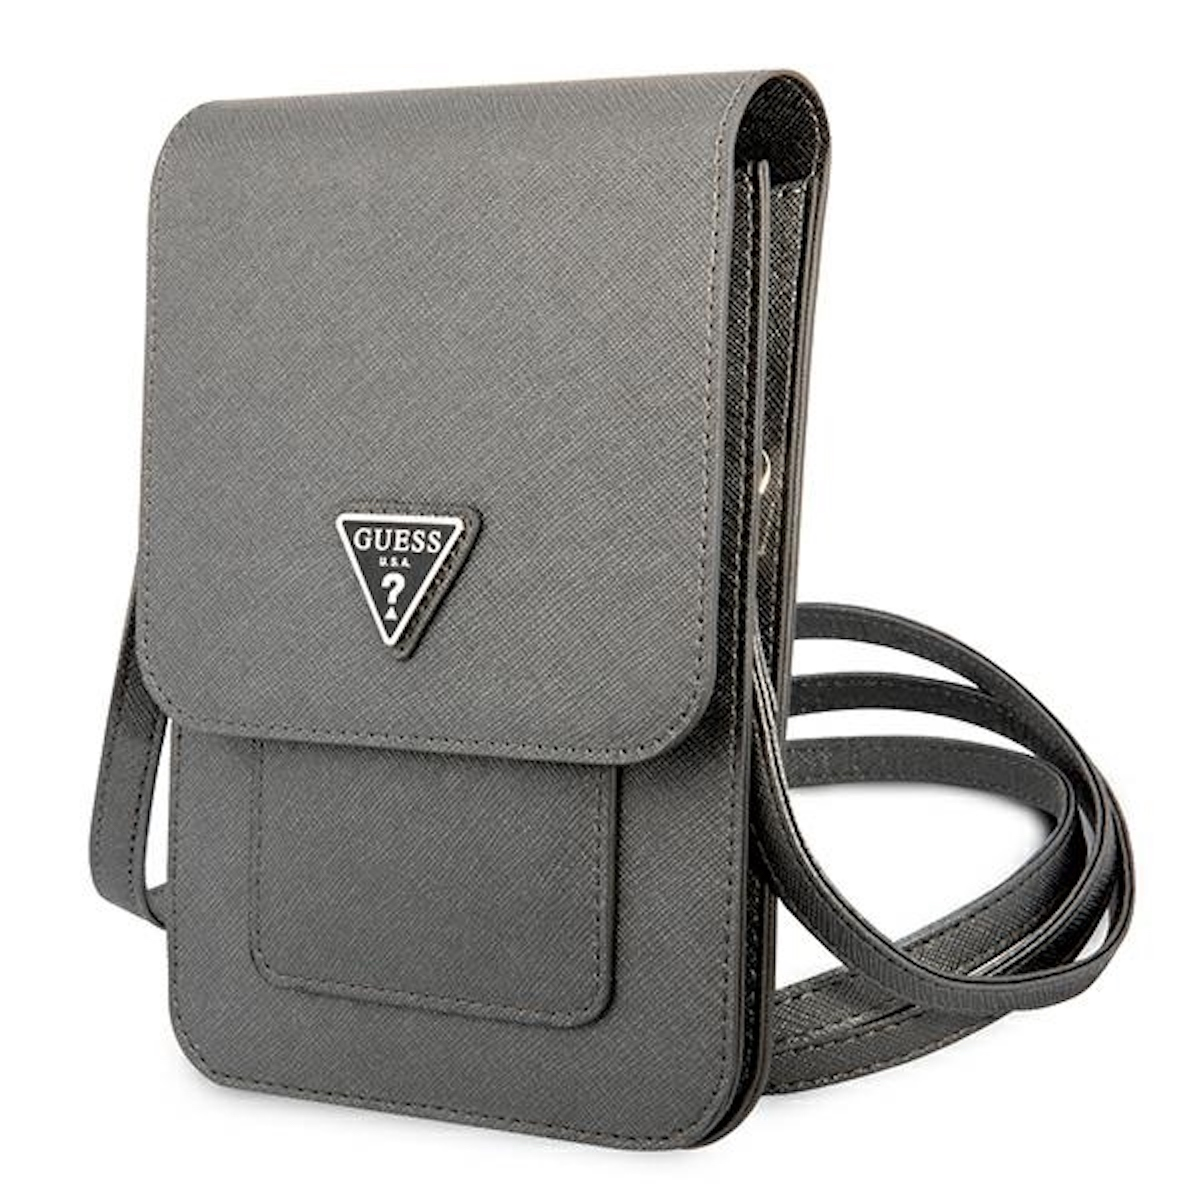 GUESS Saffiano Triangle Umhängetasche, Tasche, Full Grau Universelle Cover, Universell